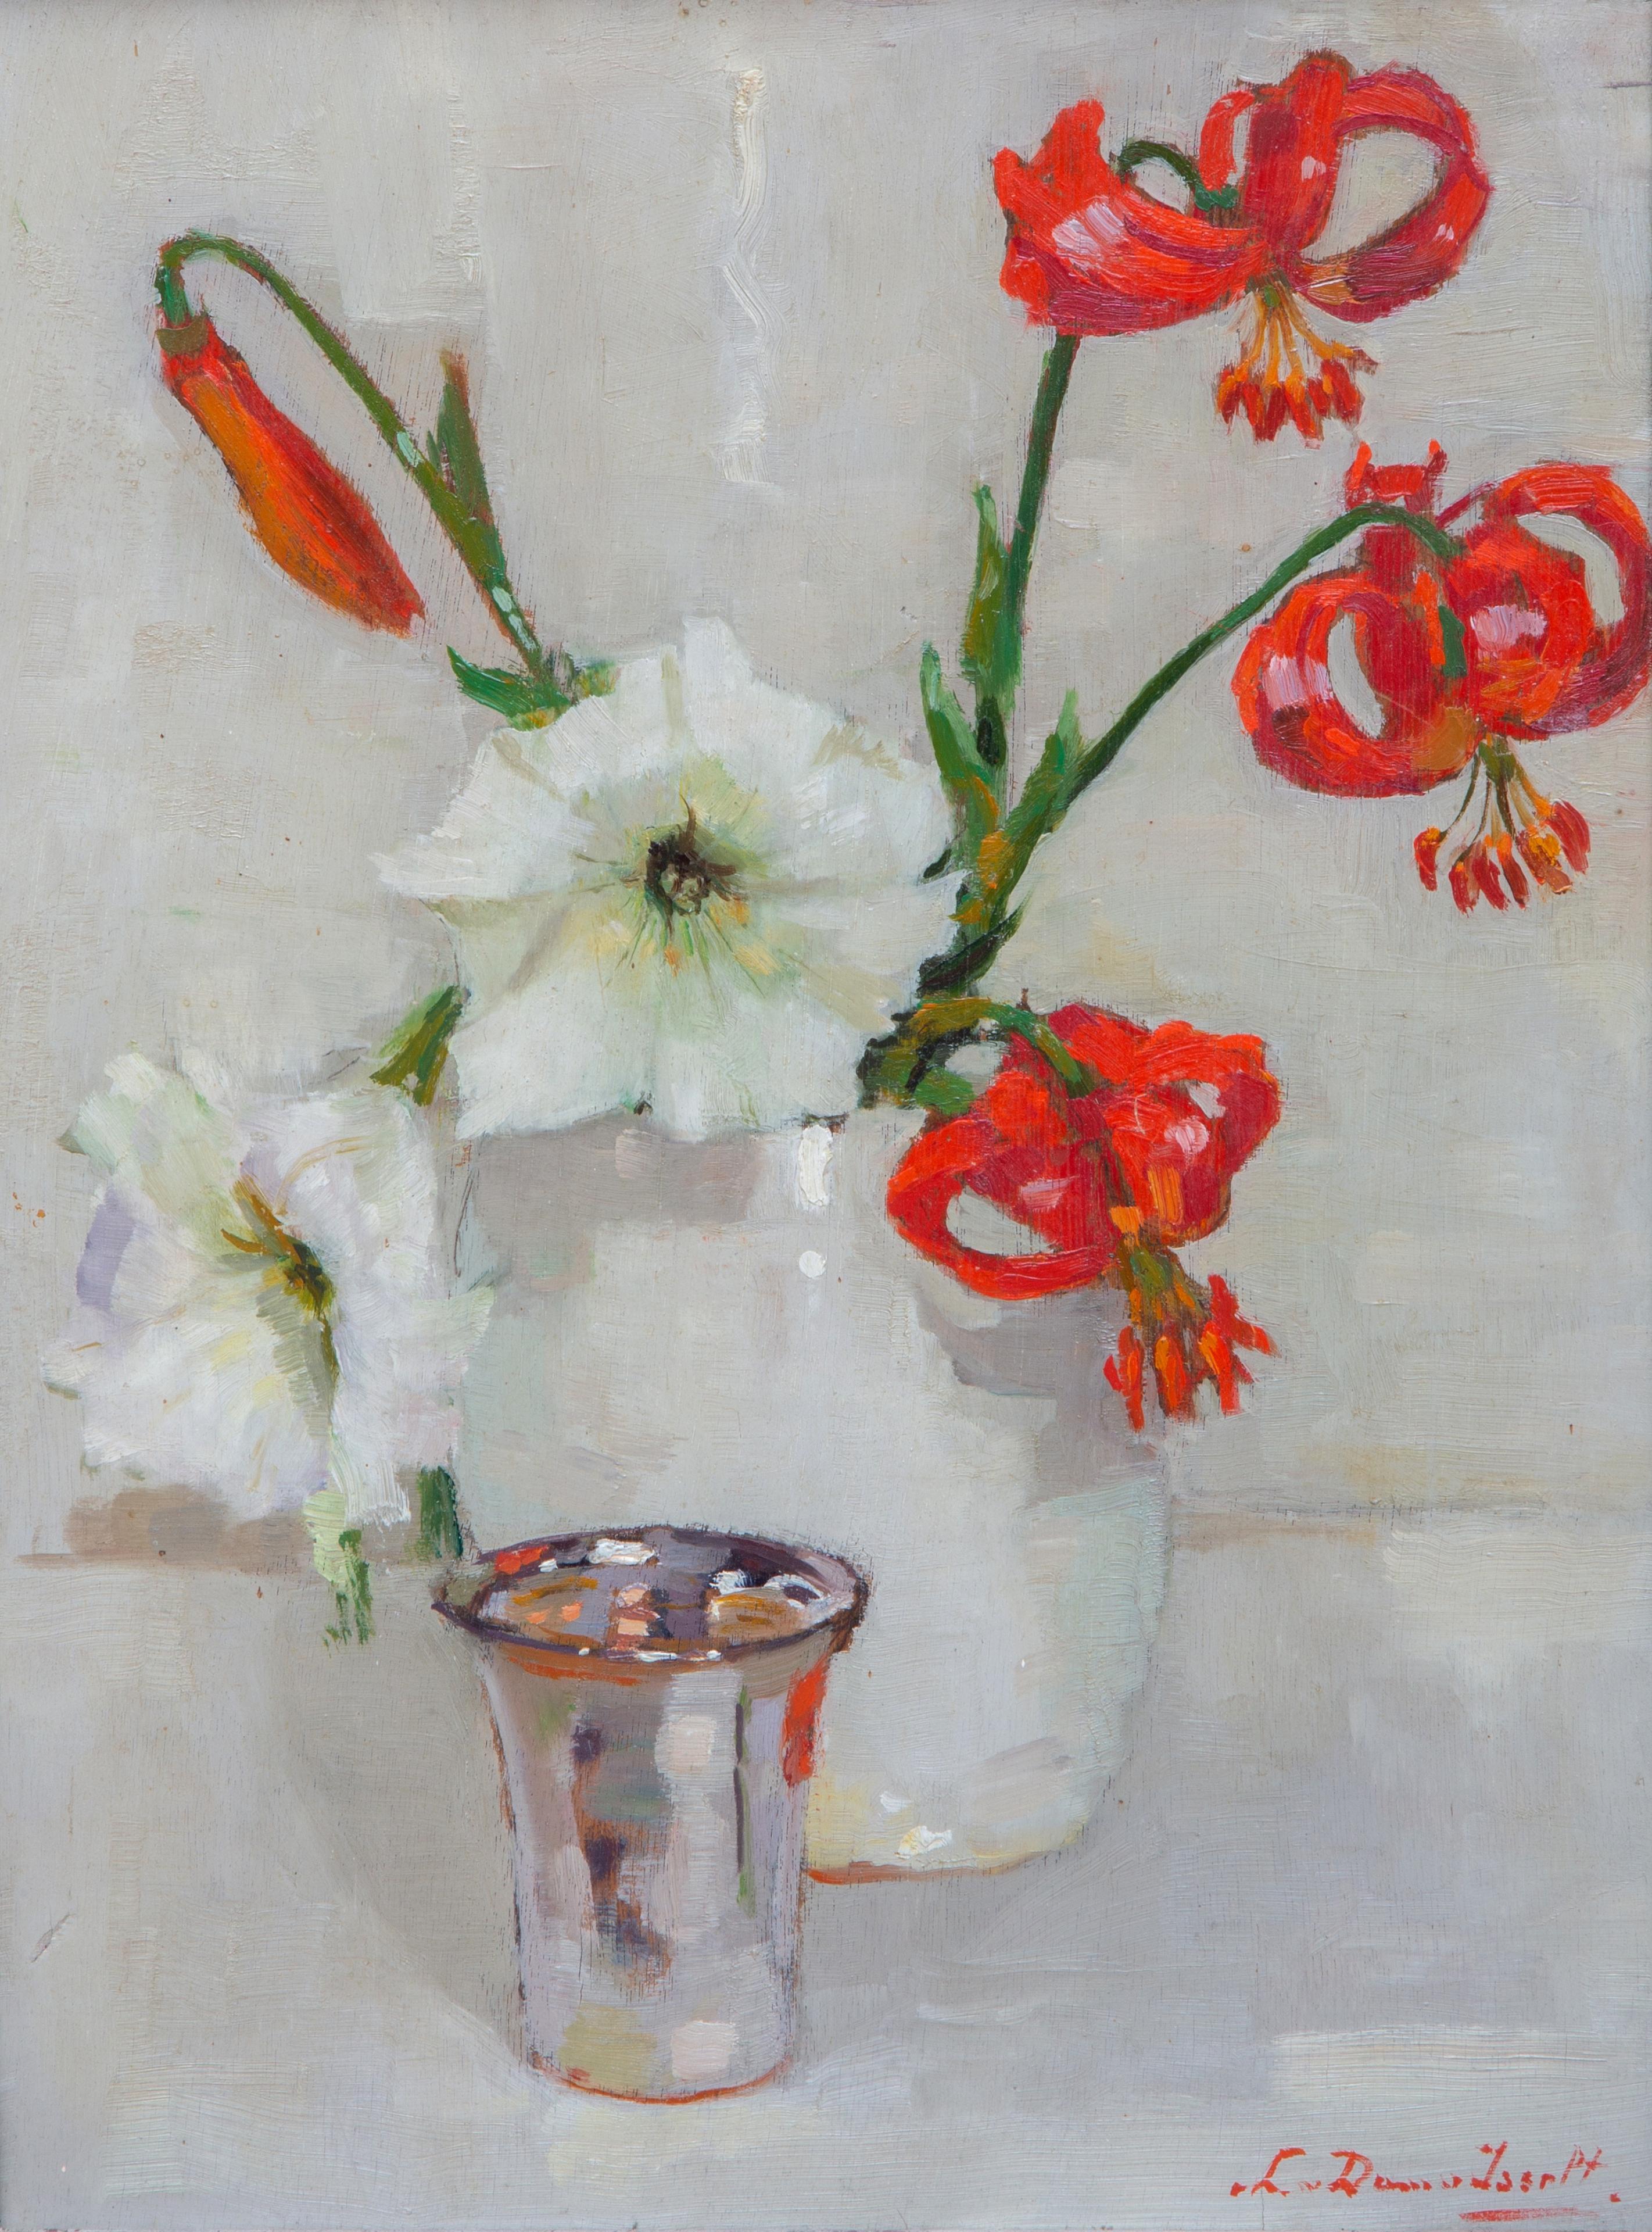 Red lilies in a white vase and a silver cup